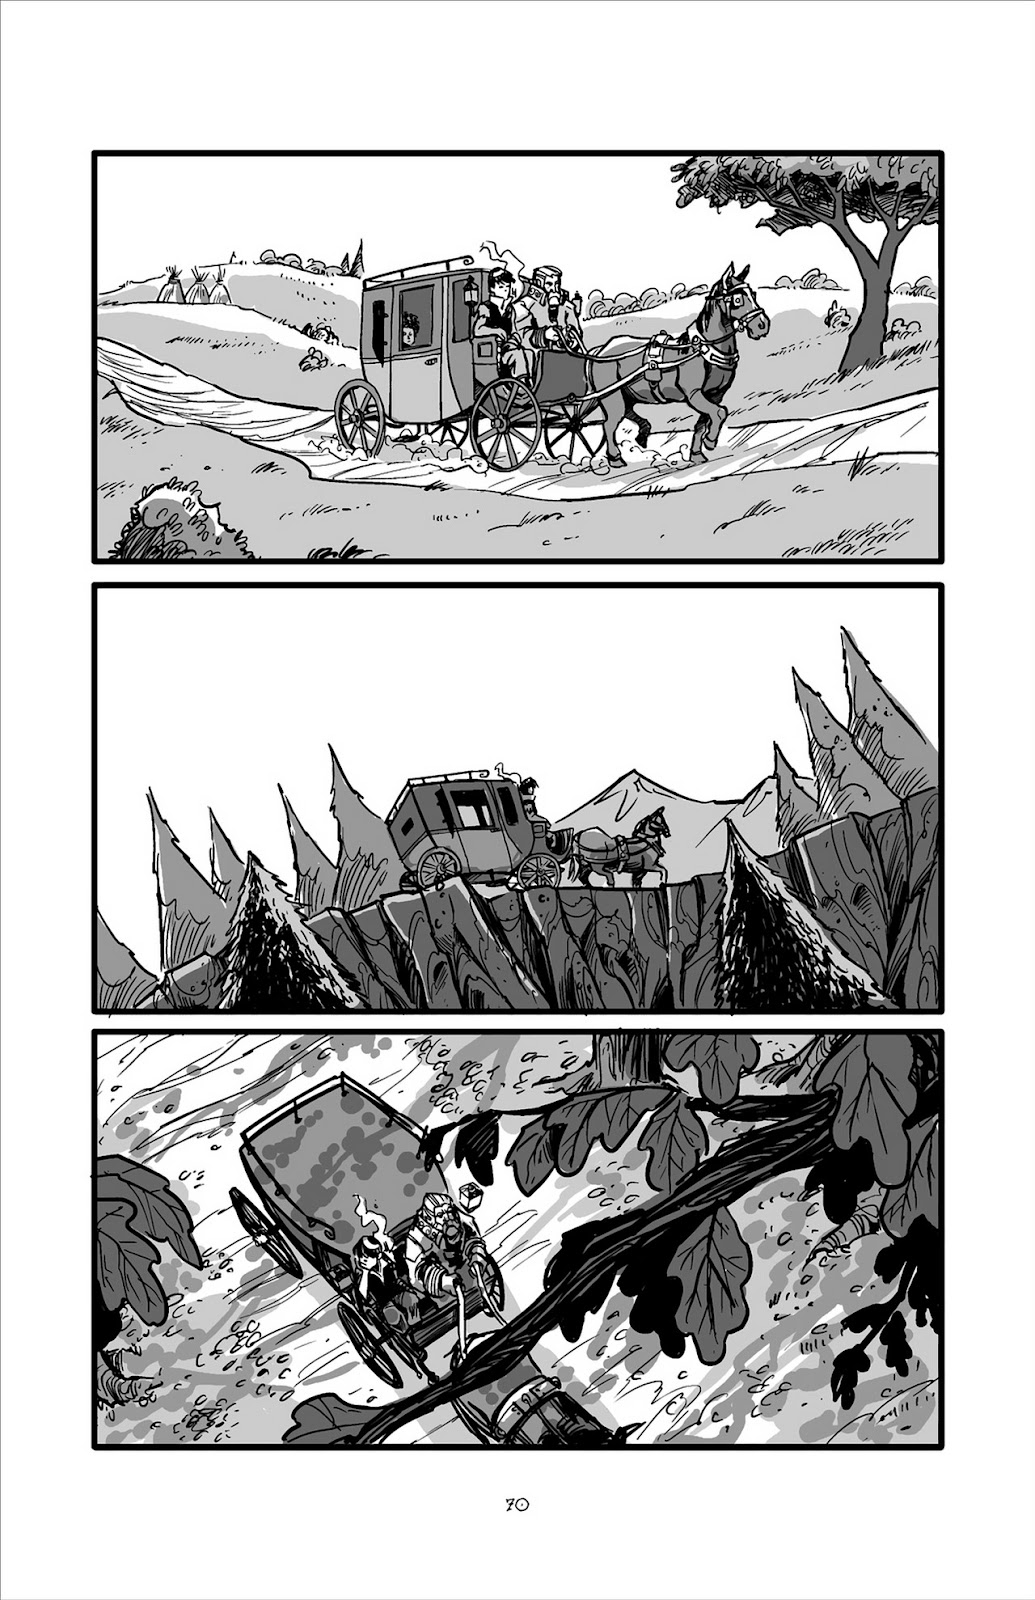 Pinocchio: Vampire Slayer - Of Wood and Blood issue 3 - Page 21